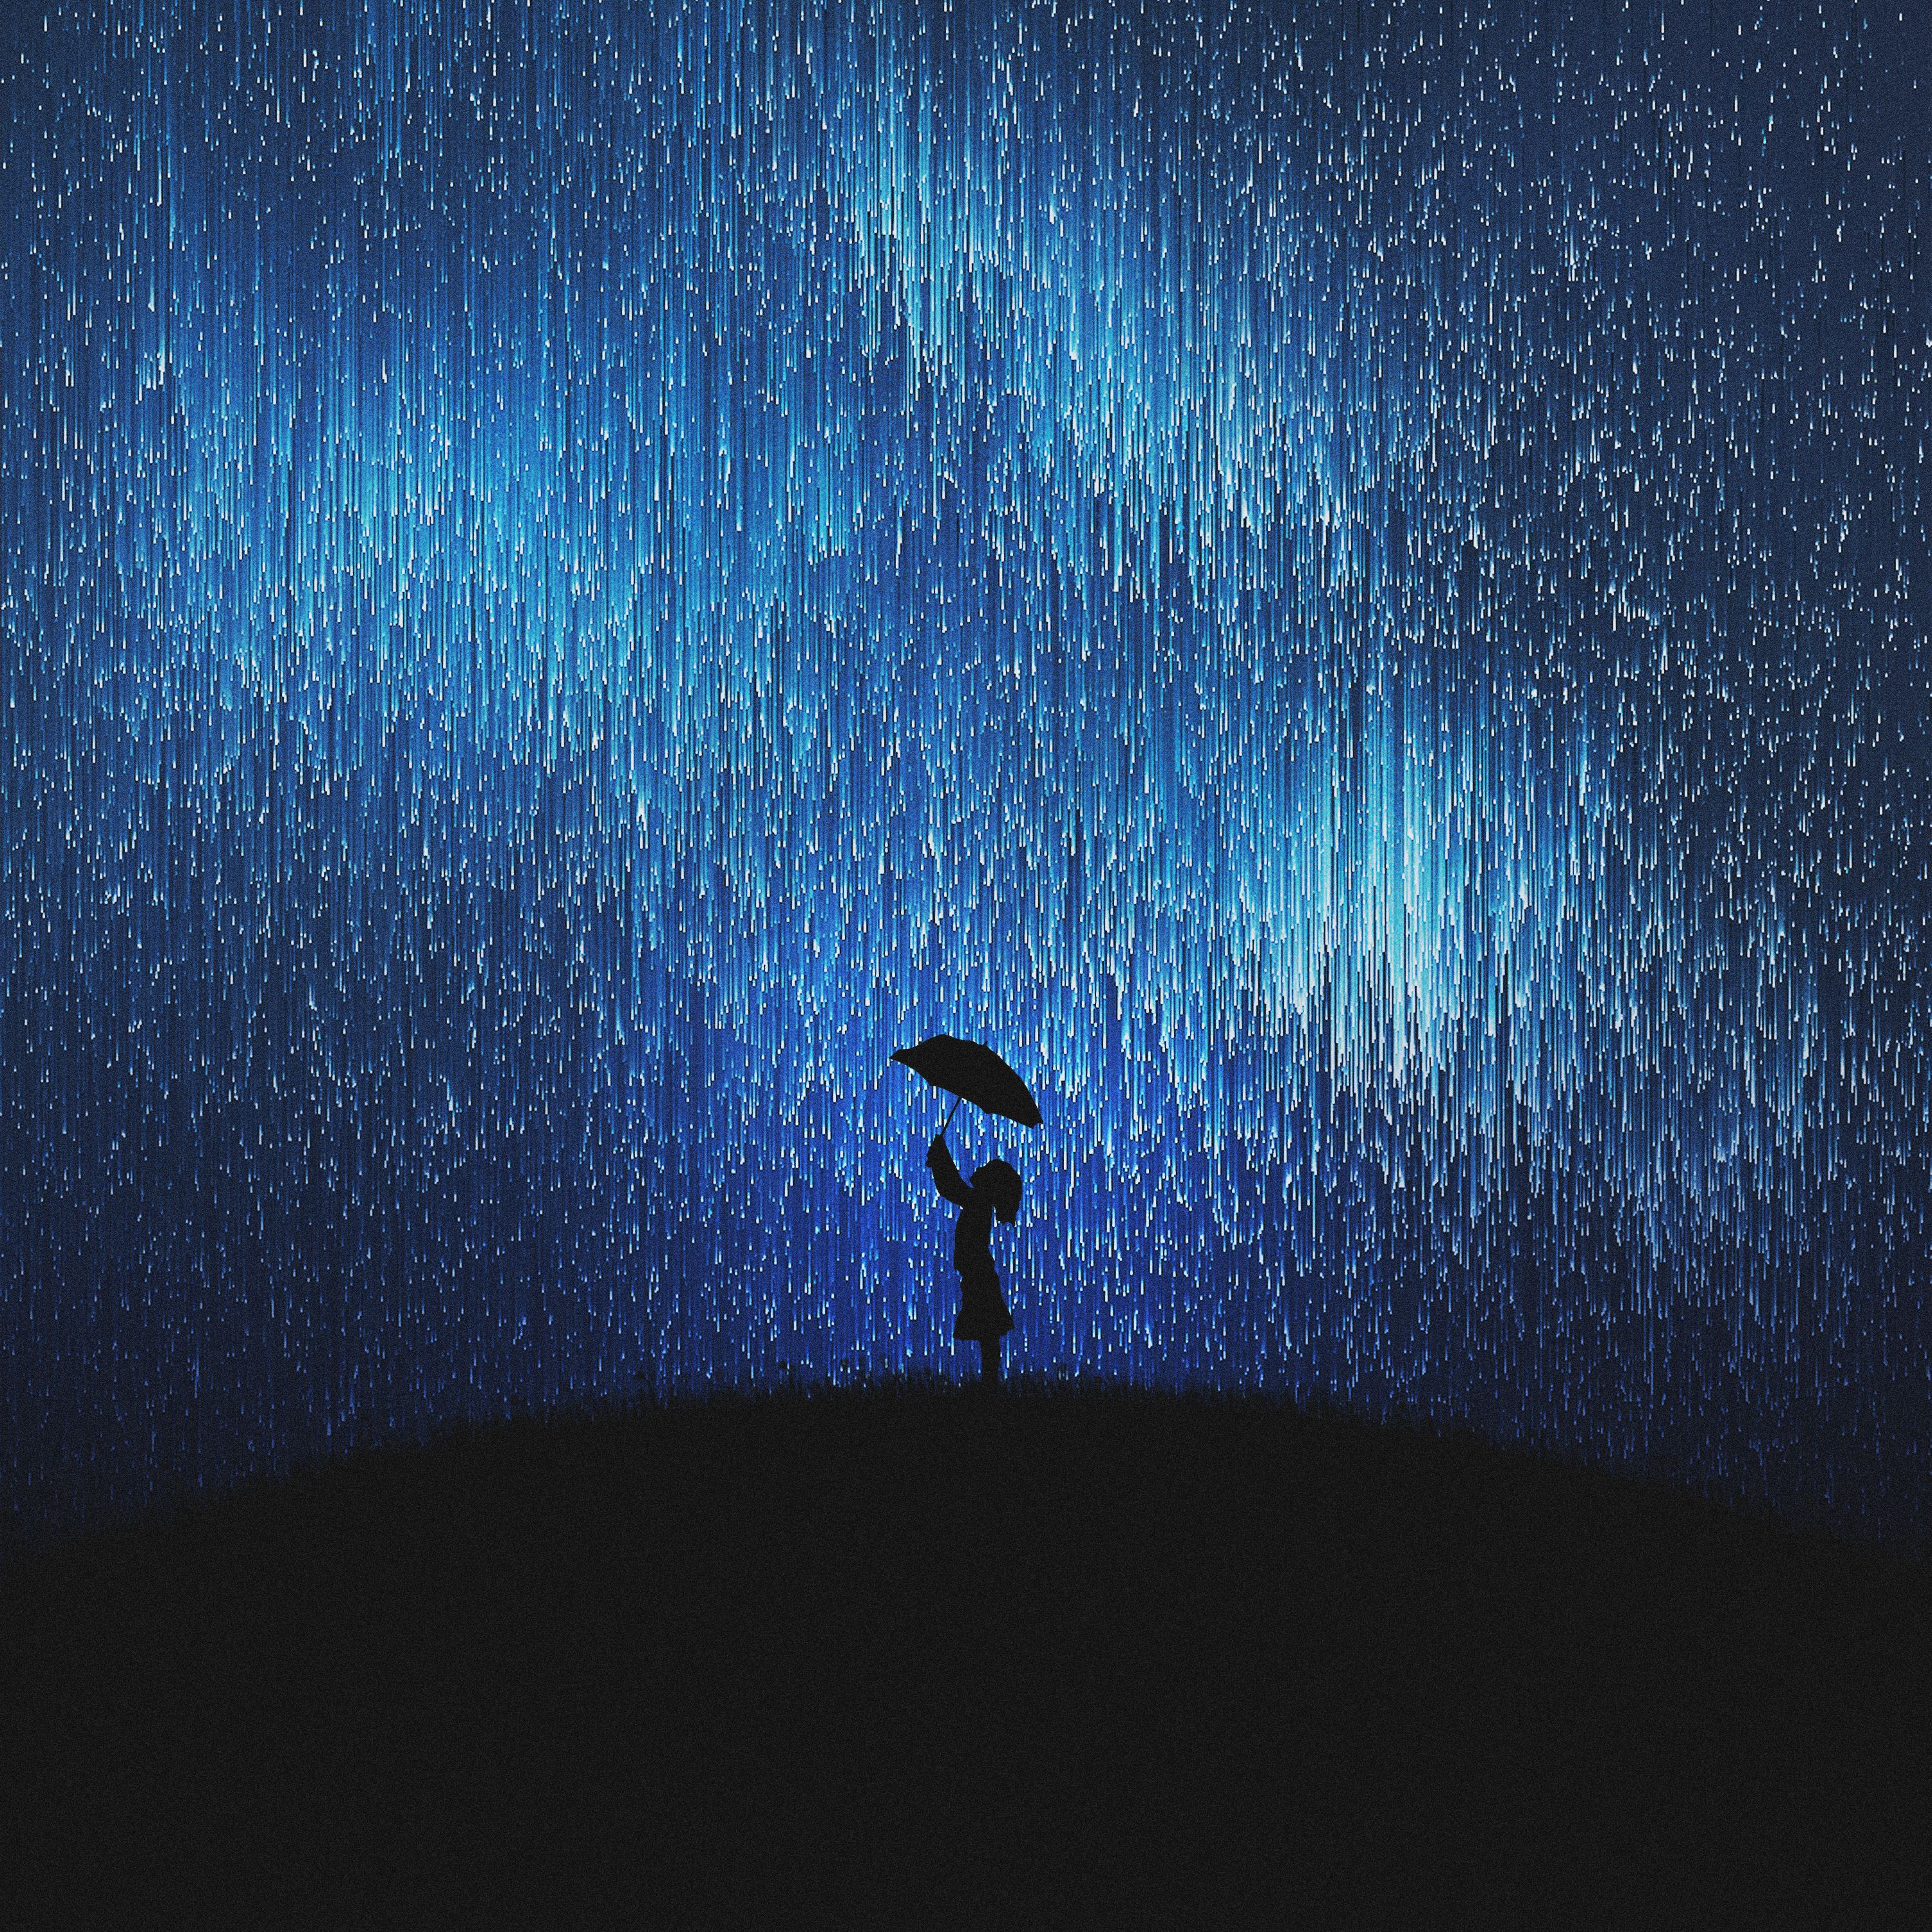 149468 download wallpaper vector, rain, art, silhouette, umbrella screensavers and pictures for free